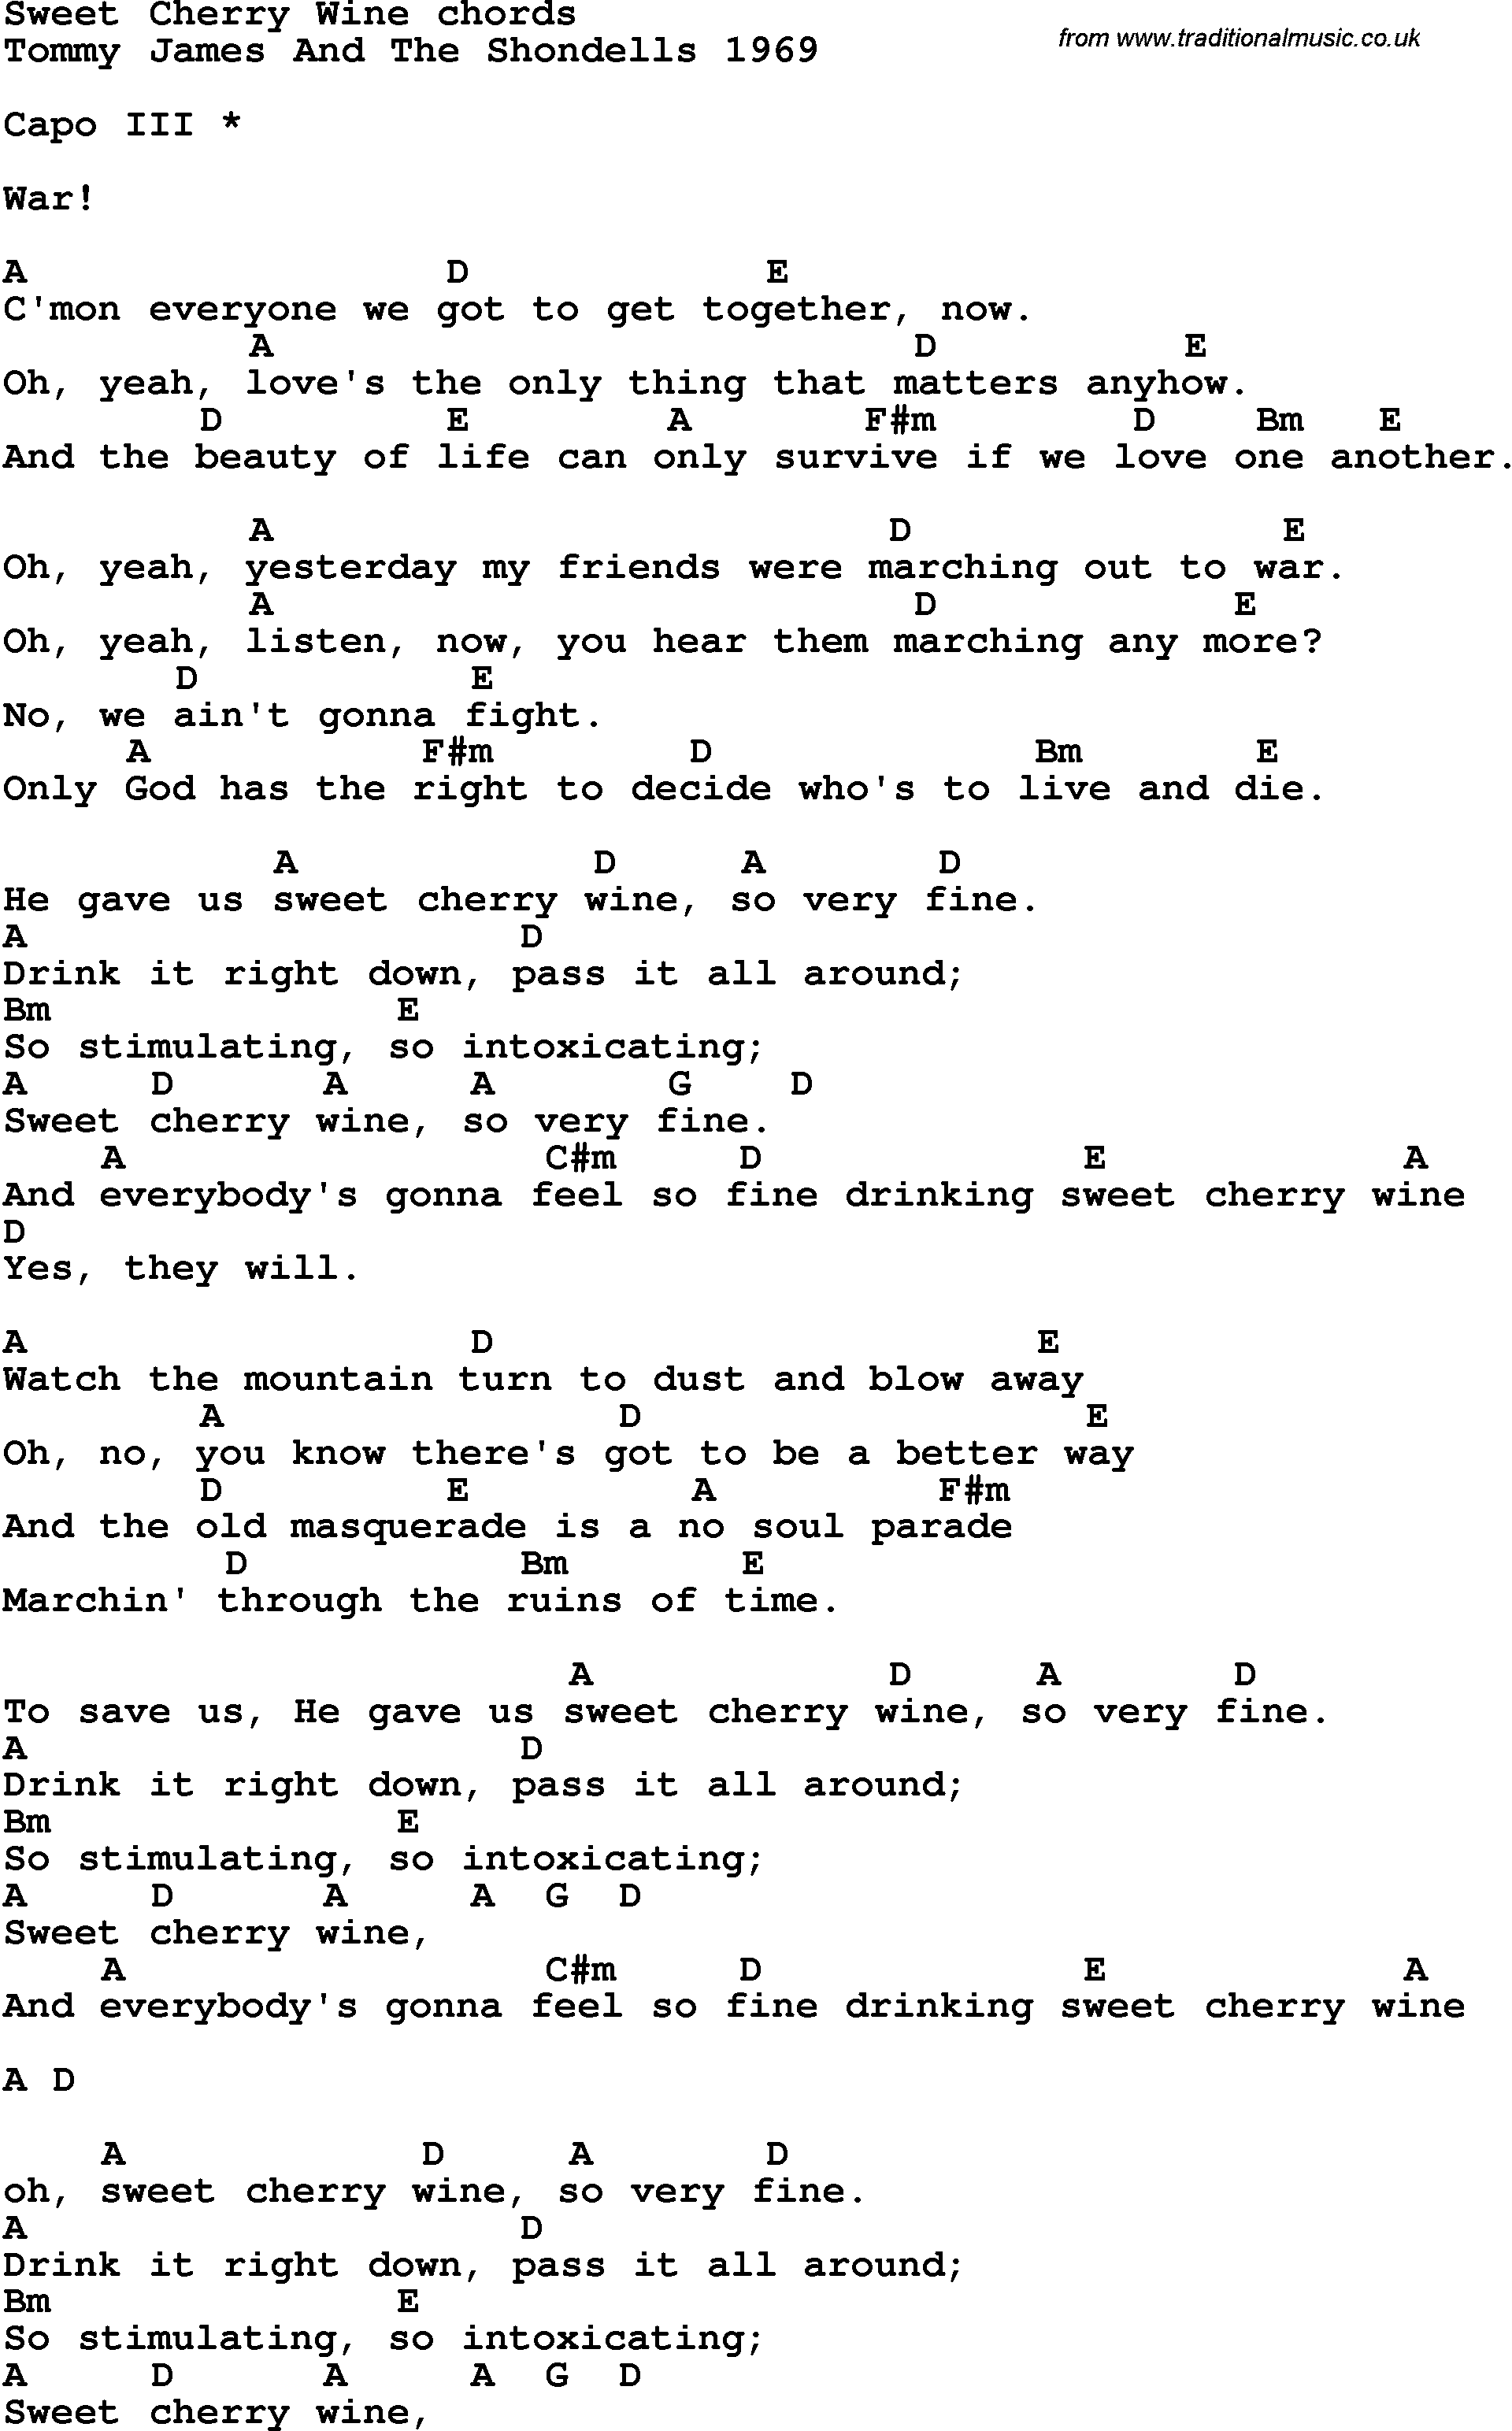 Song Lyrics with guitar chords for Sweet Cherry Wine